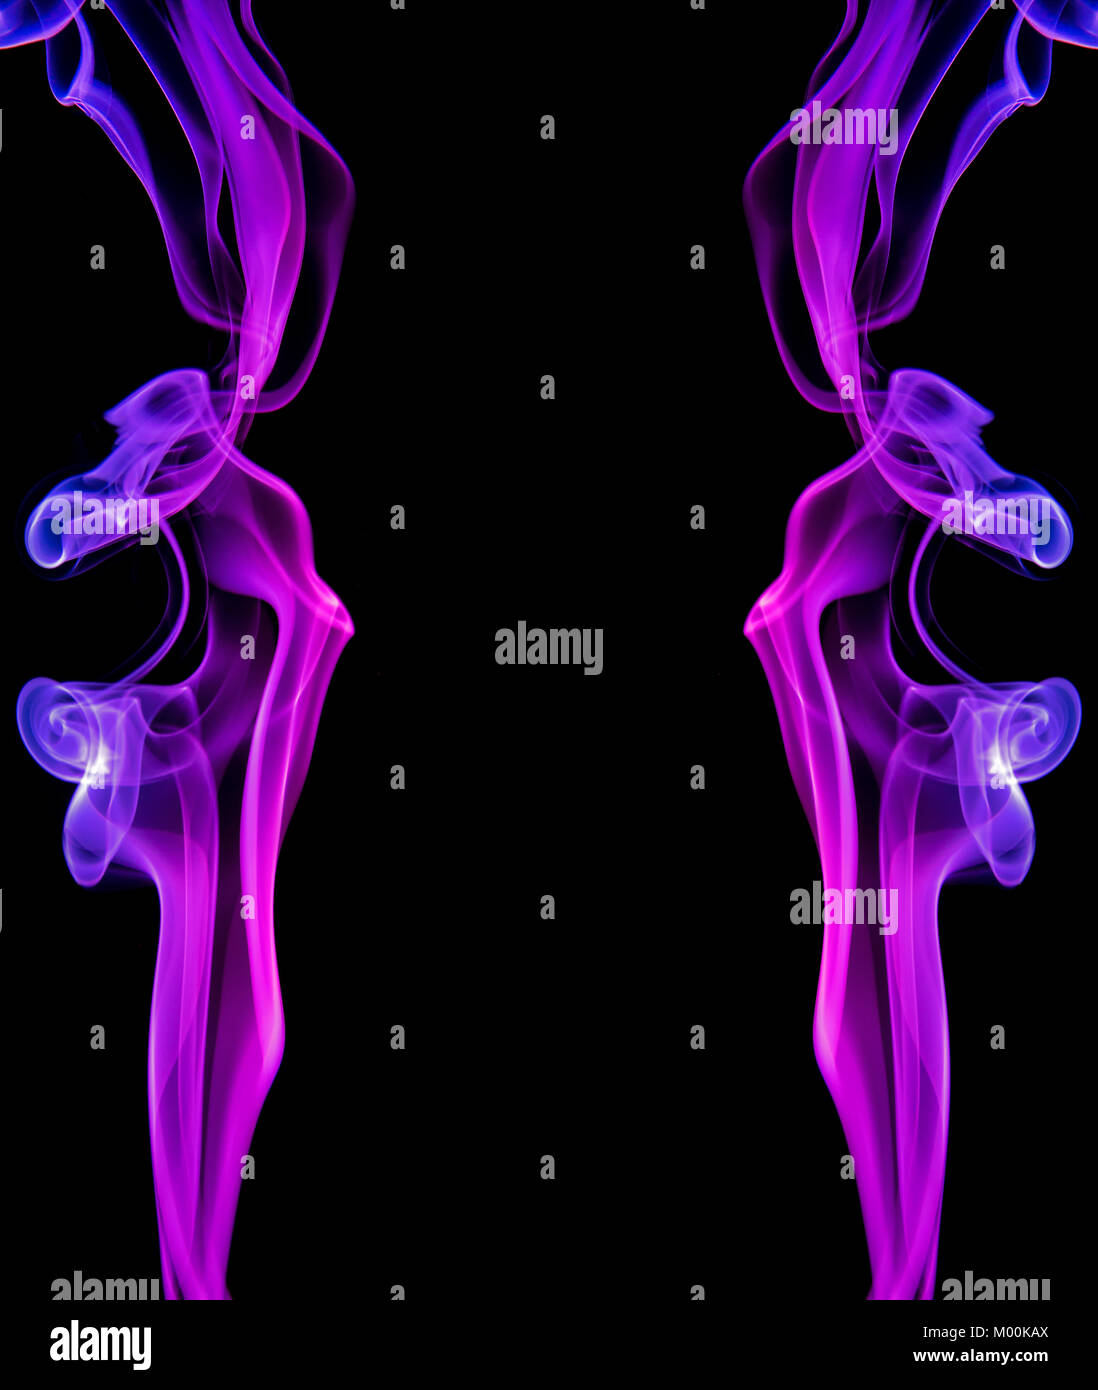 Two vertical mirror-image columns of coloured smoke showing purple hues having artistic appeal as well as providing a central black space for copy Stock Photo